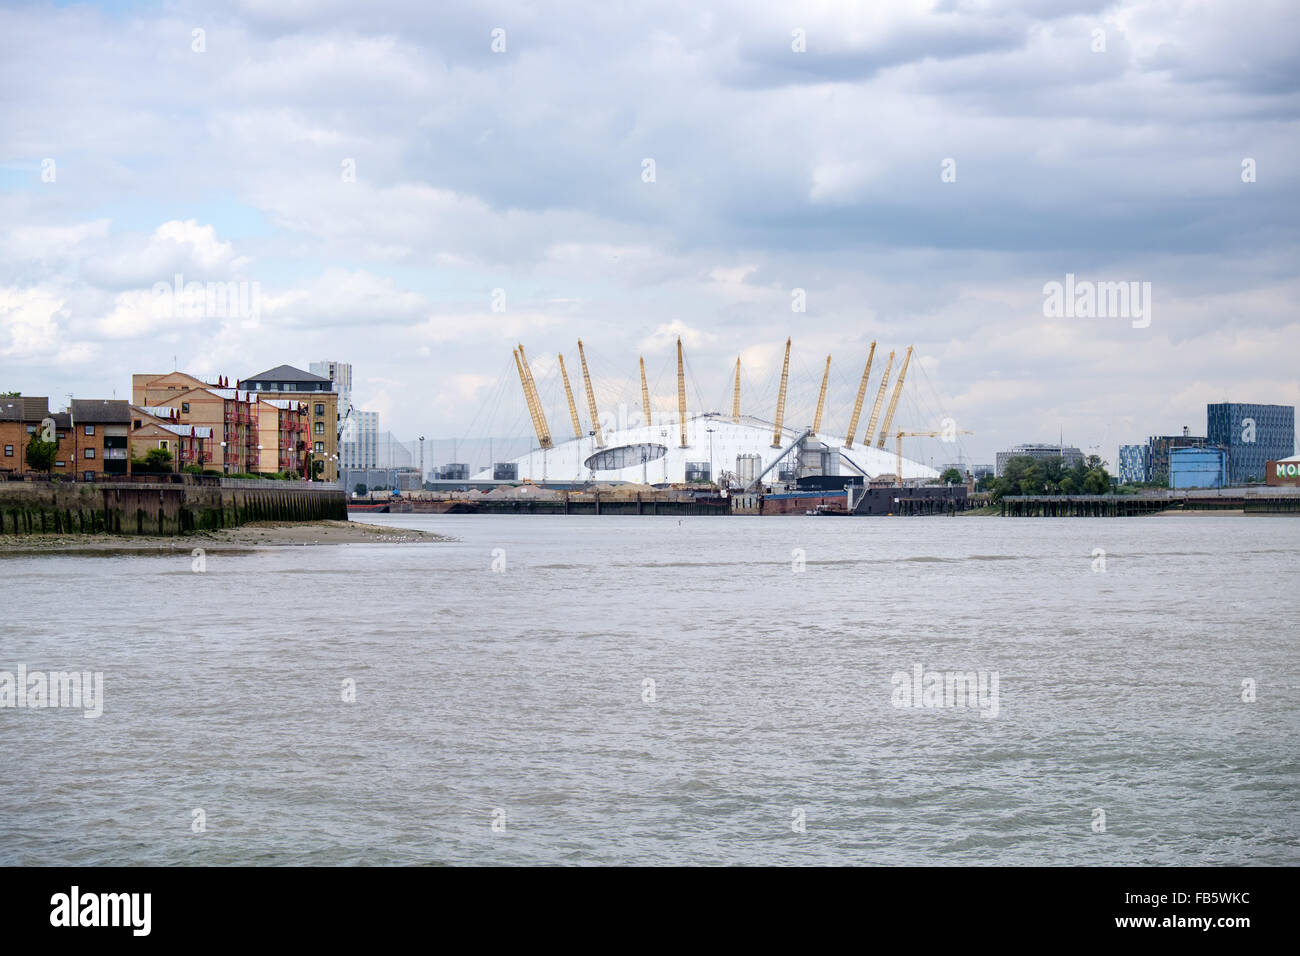 Millennium Dome (the O2 Arena) on the Greenwich peninsula, UK, seen from the River Thames Stock Photo